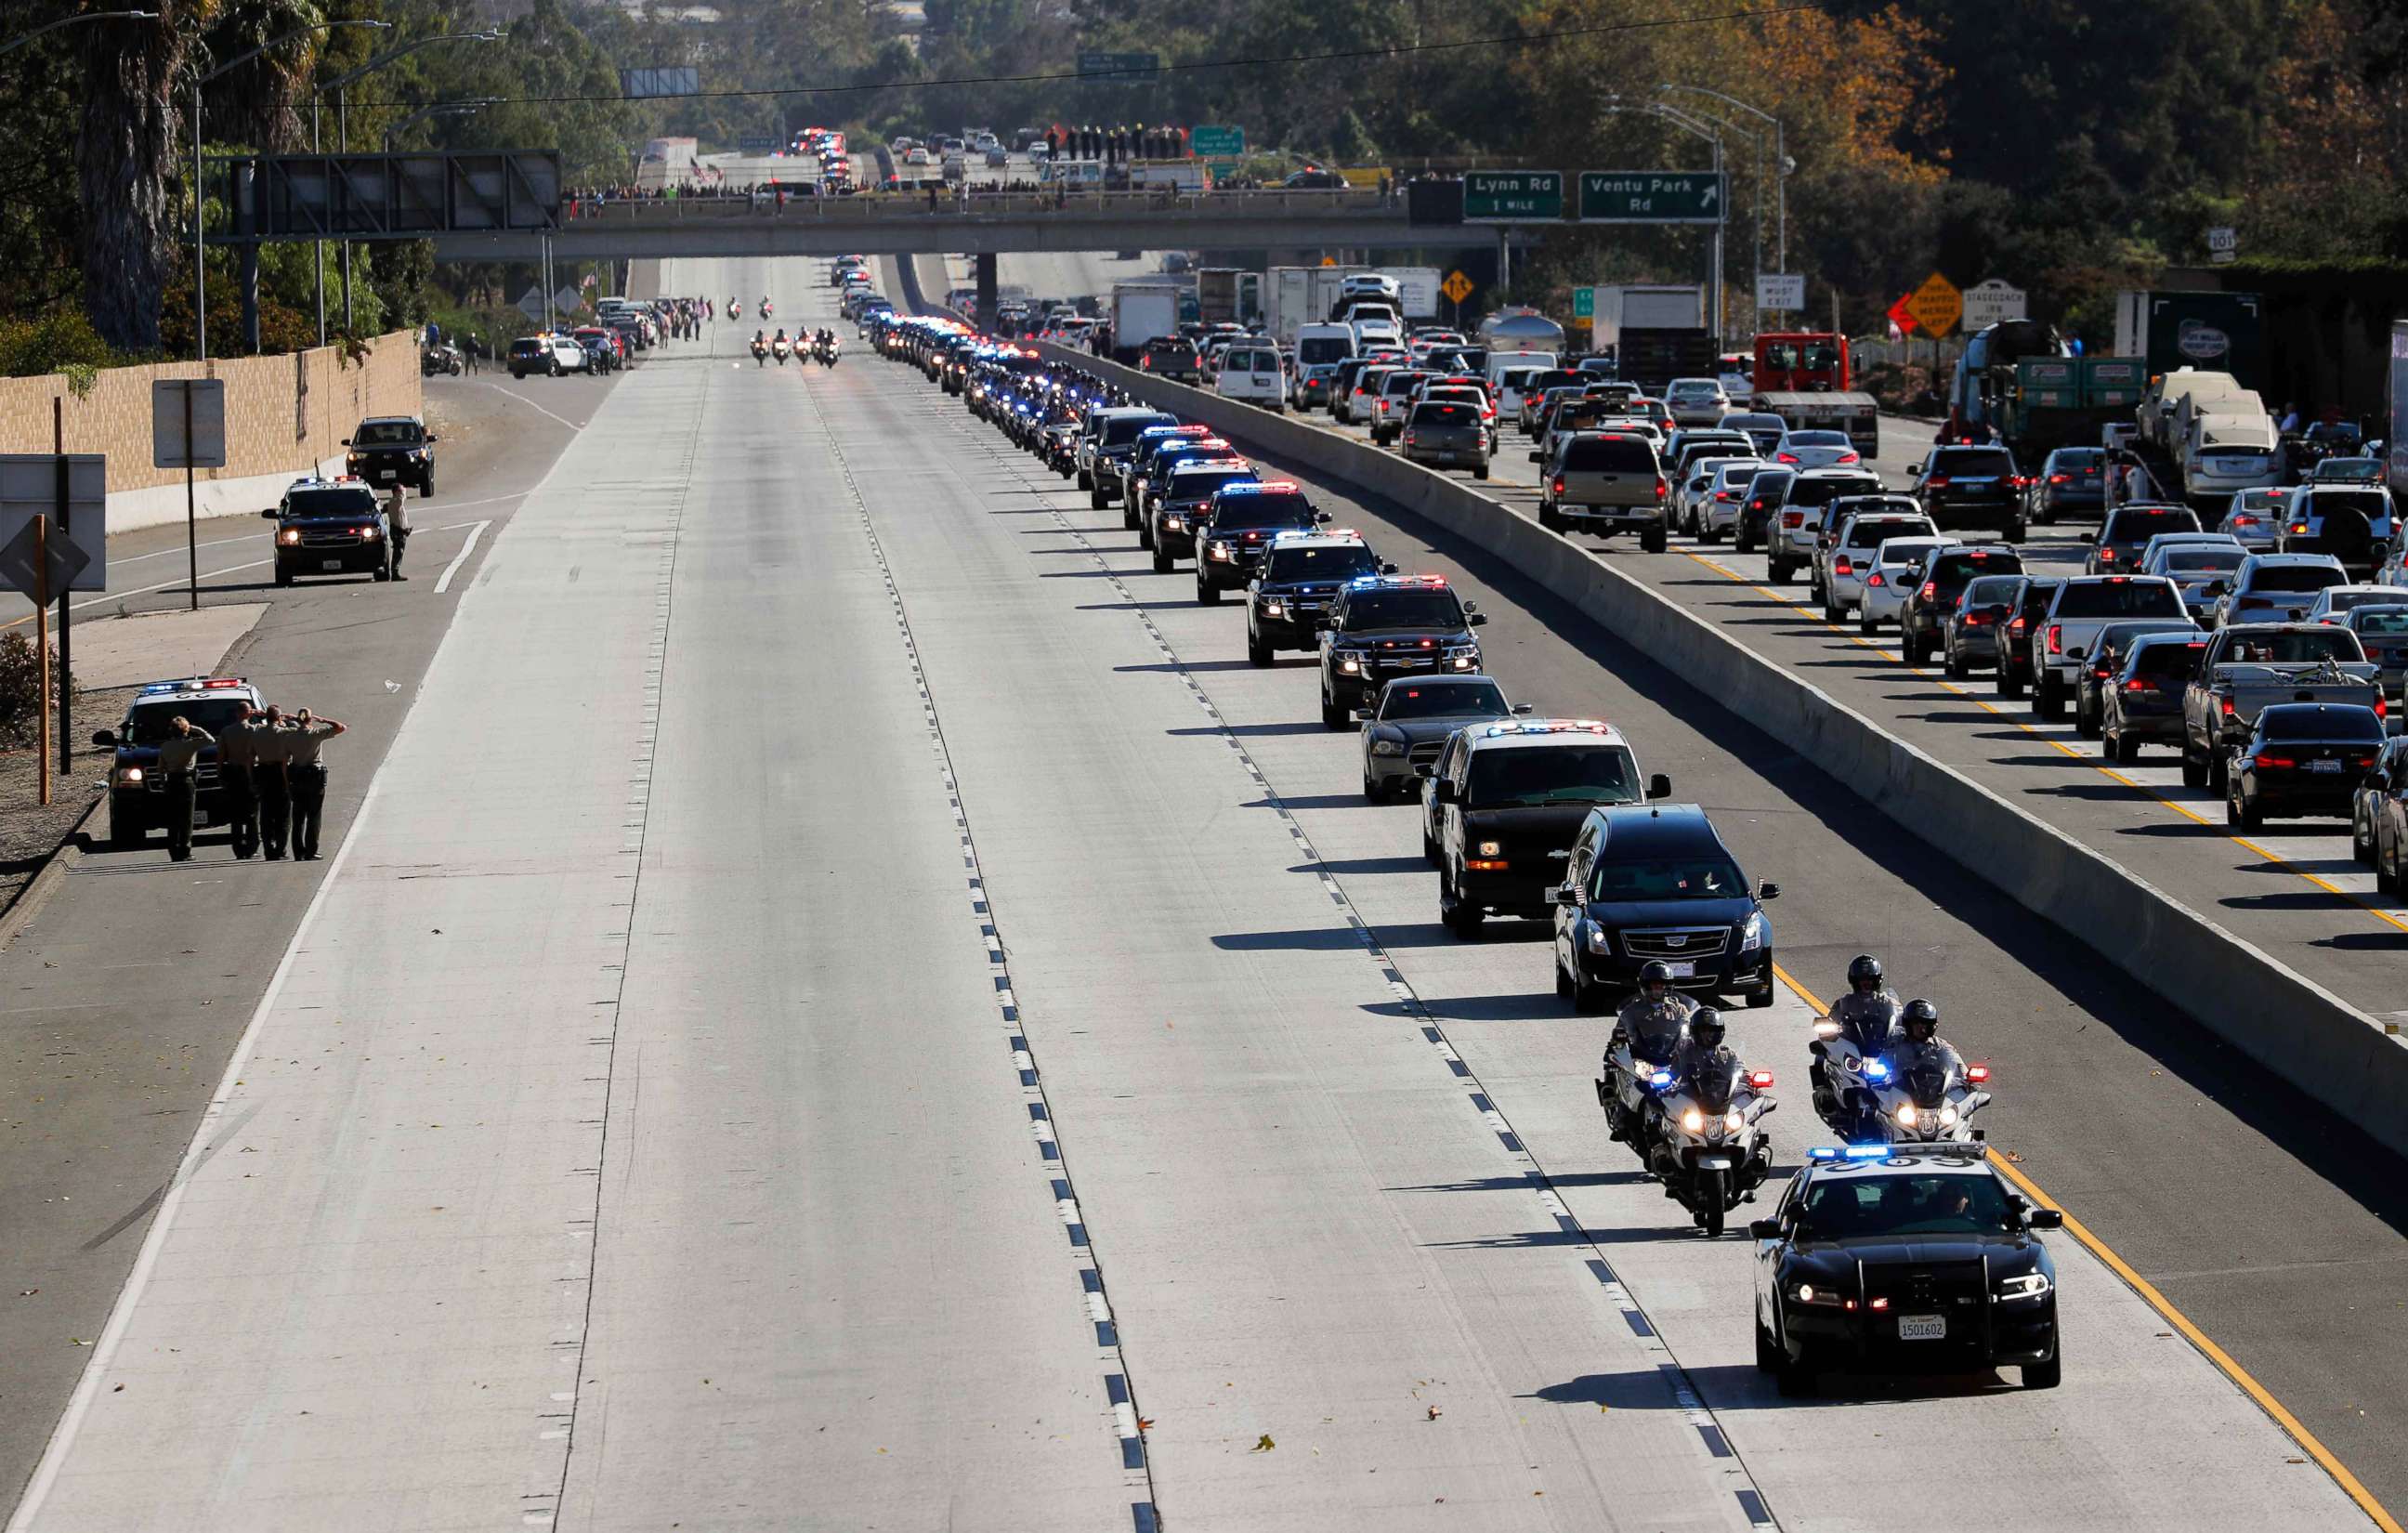 PHOTO: A procession for the body of Sergeant Ron Helus, who died in a shooting incident at a Thousand Oaks bar,  drives down Ventura Highway 101 in Thousand Oaks, Calif., Nov. 8, 2018. 